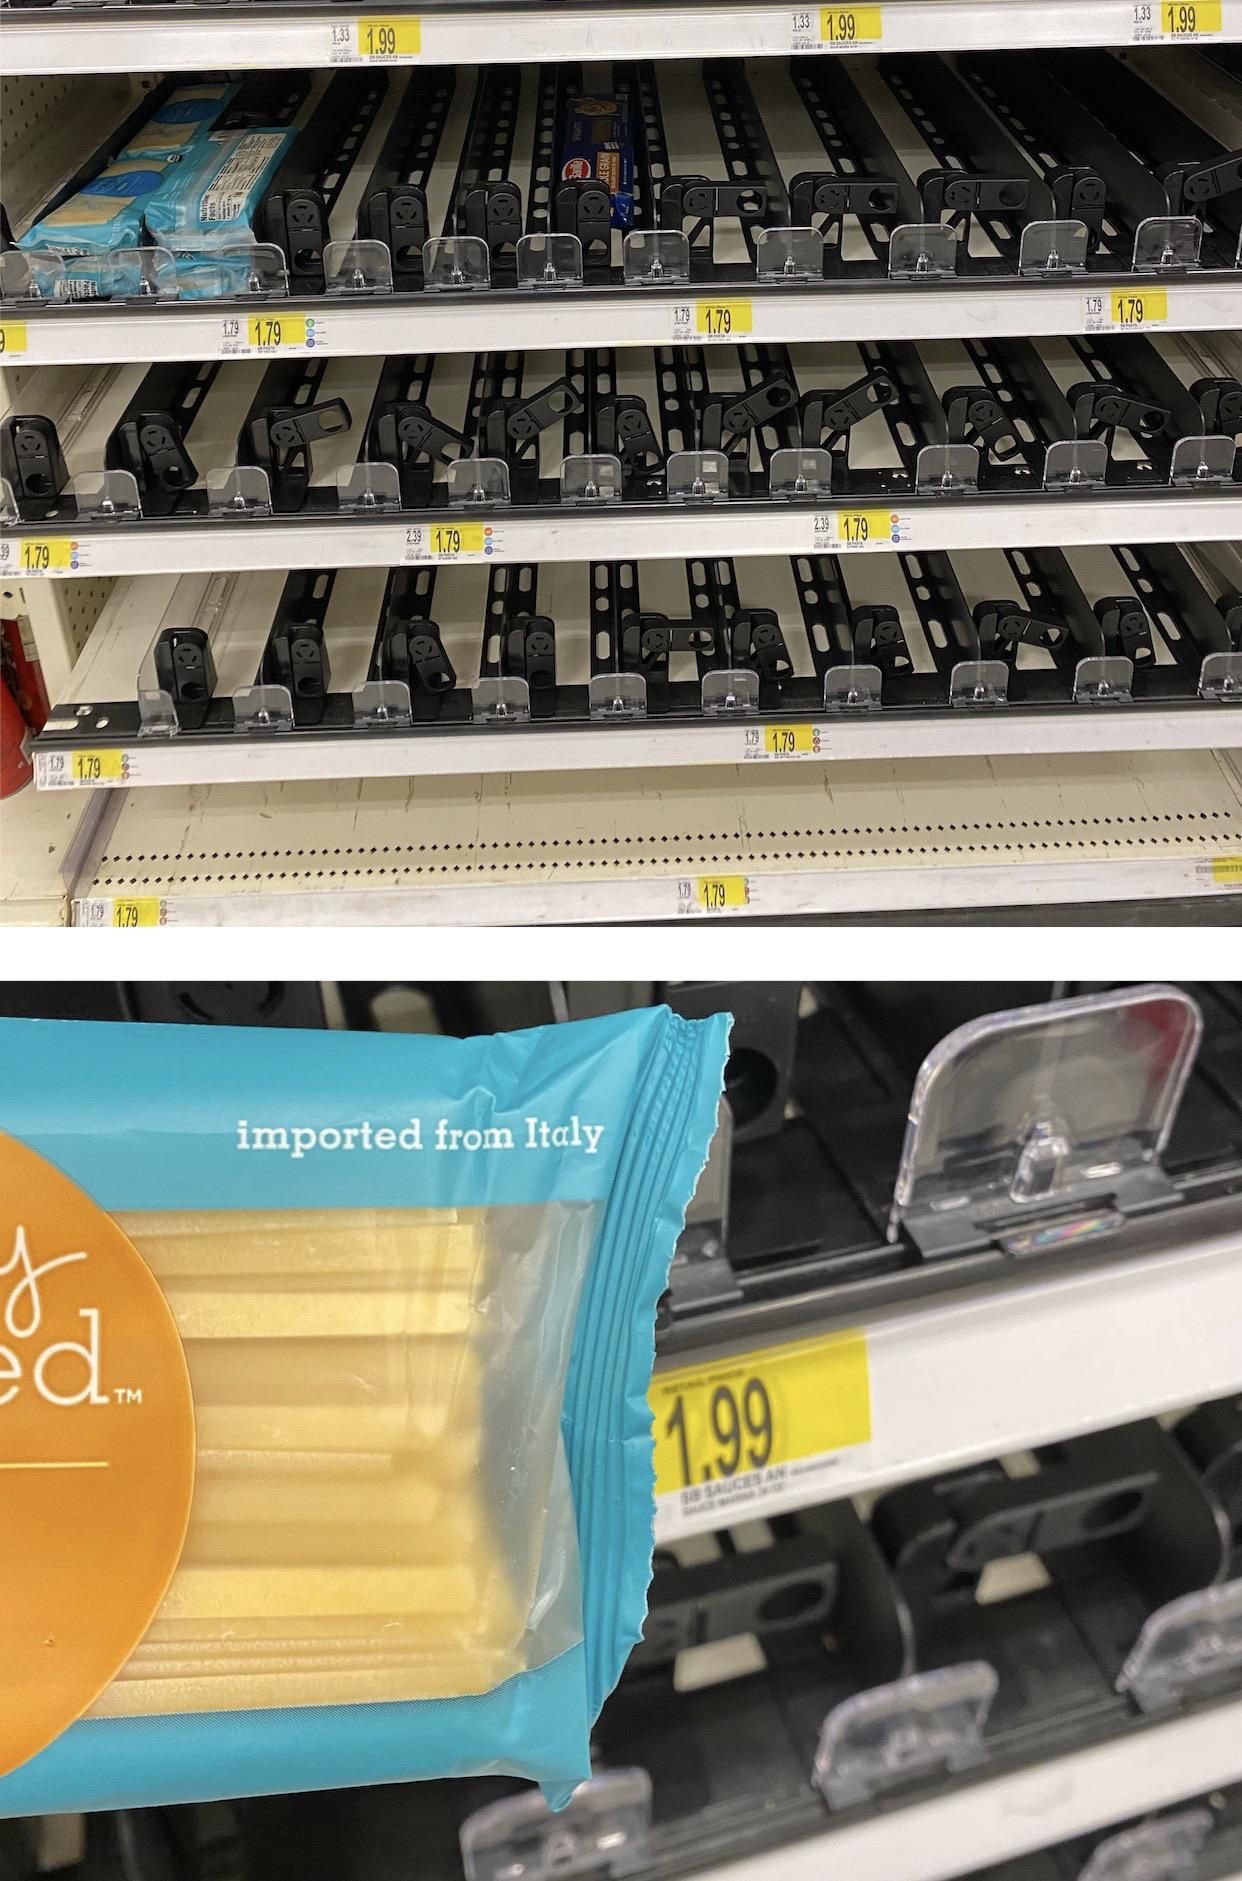 Everyone was panic buying spaghetti. I was wondering while only one brand was left